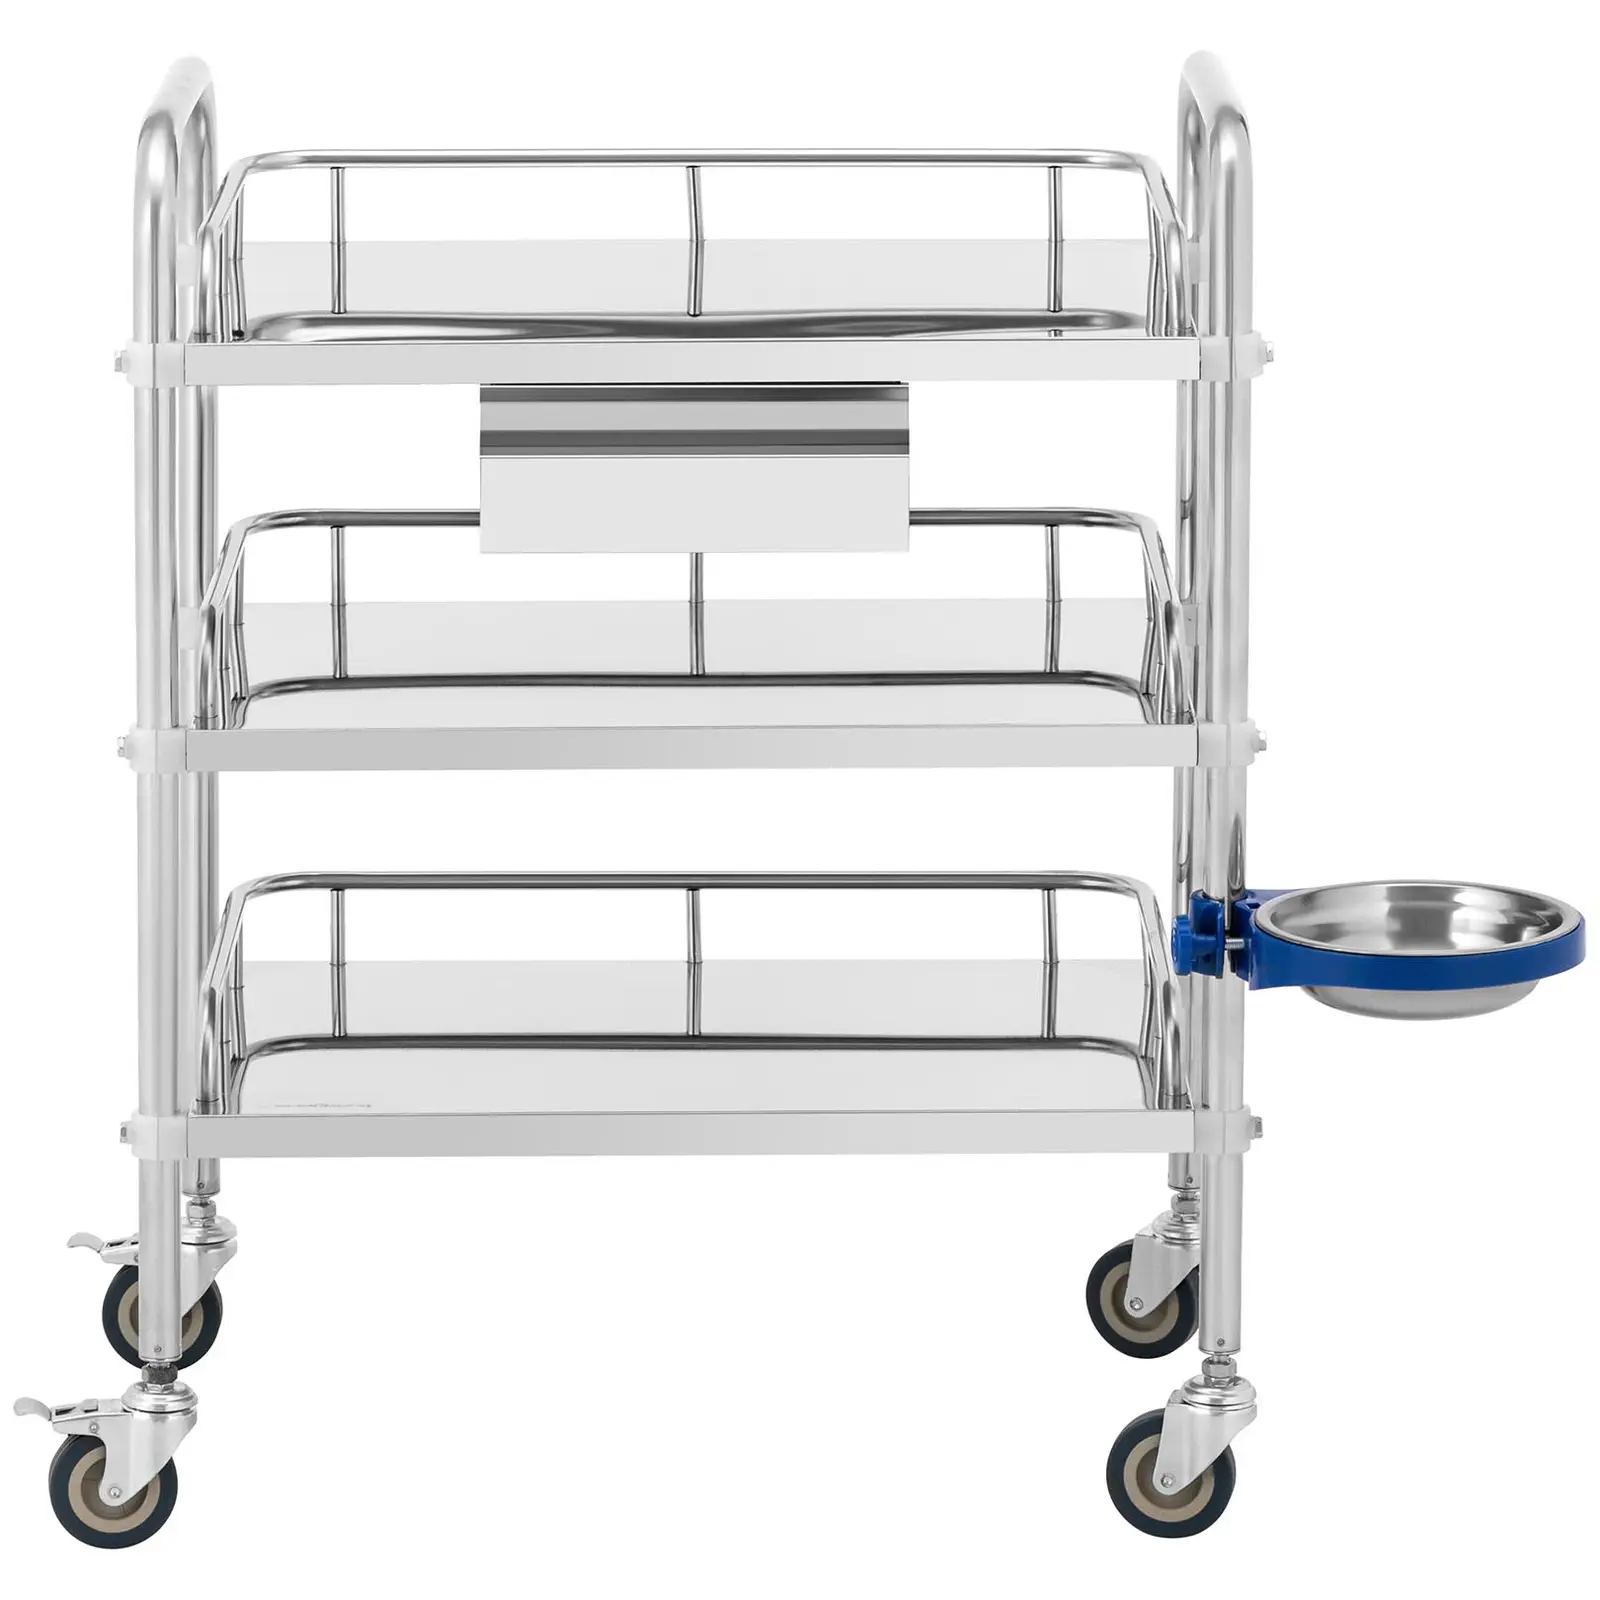 Laboratory Trolley - stainless steel - 3 shelves each 56 x 36 x 13 cm - 1 drawer - 15 kg